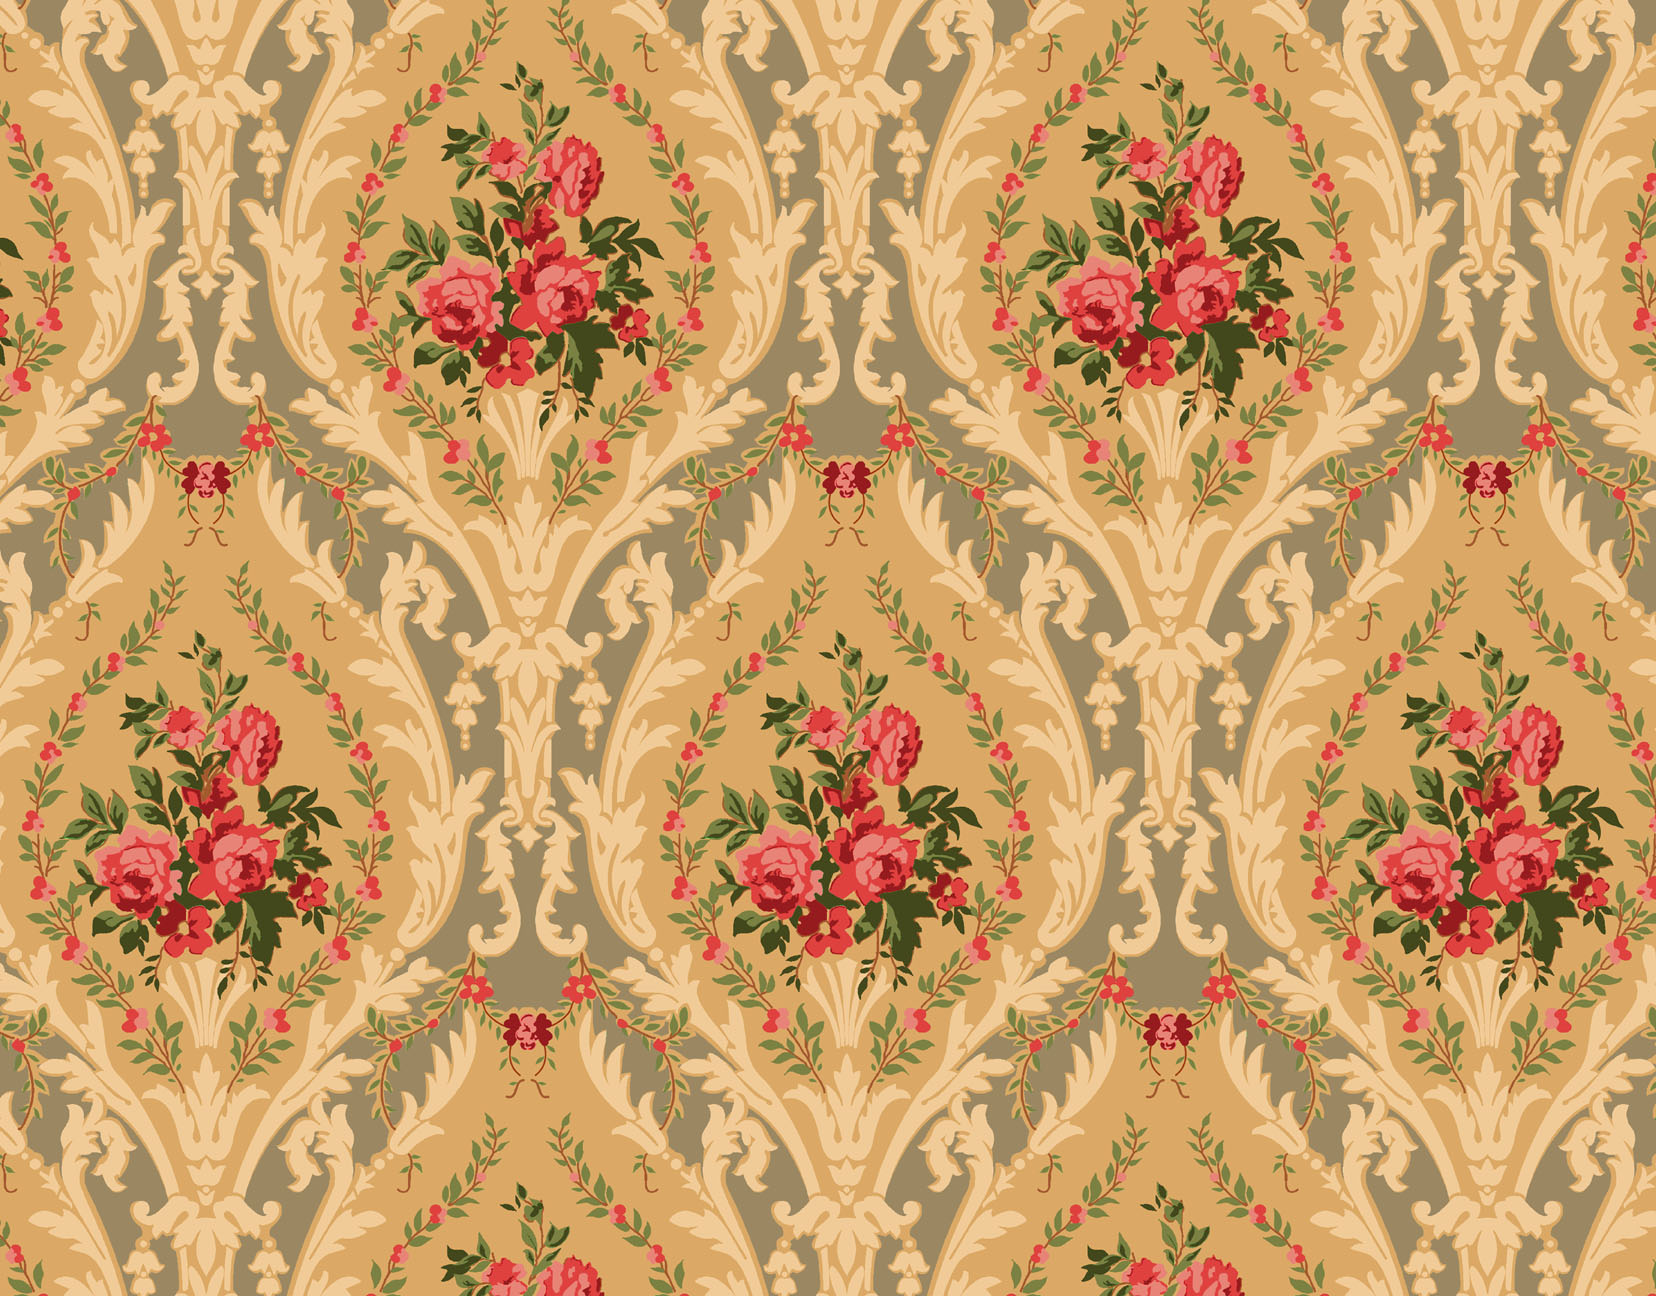 Late Victorian Early Arts and Crafts   Historic Wallpapers   Victorian